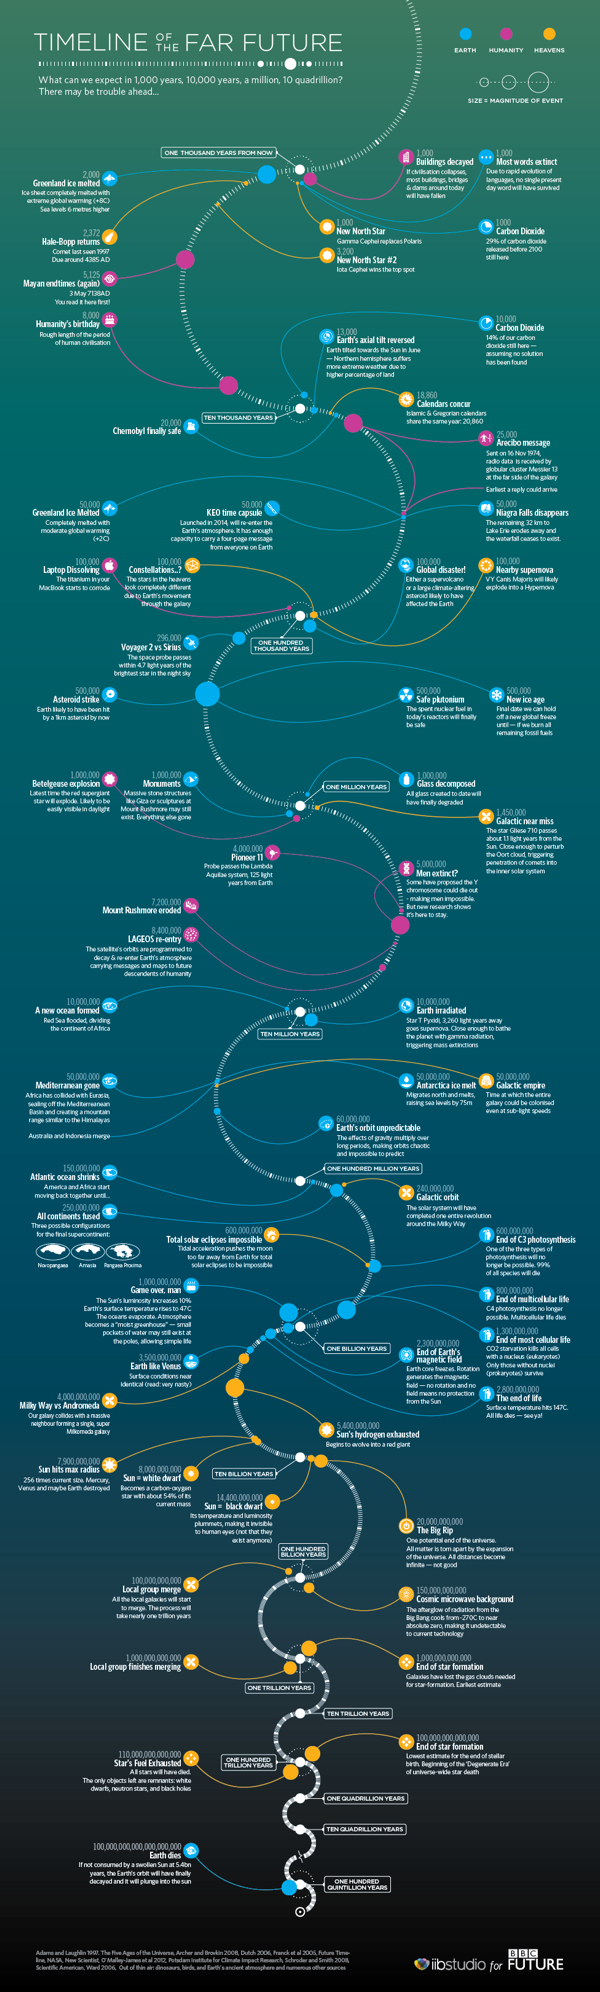 Timeline of the Far Future infographic